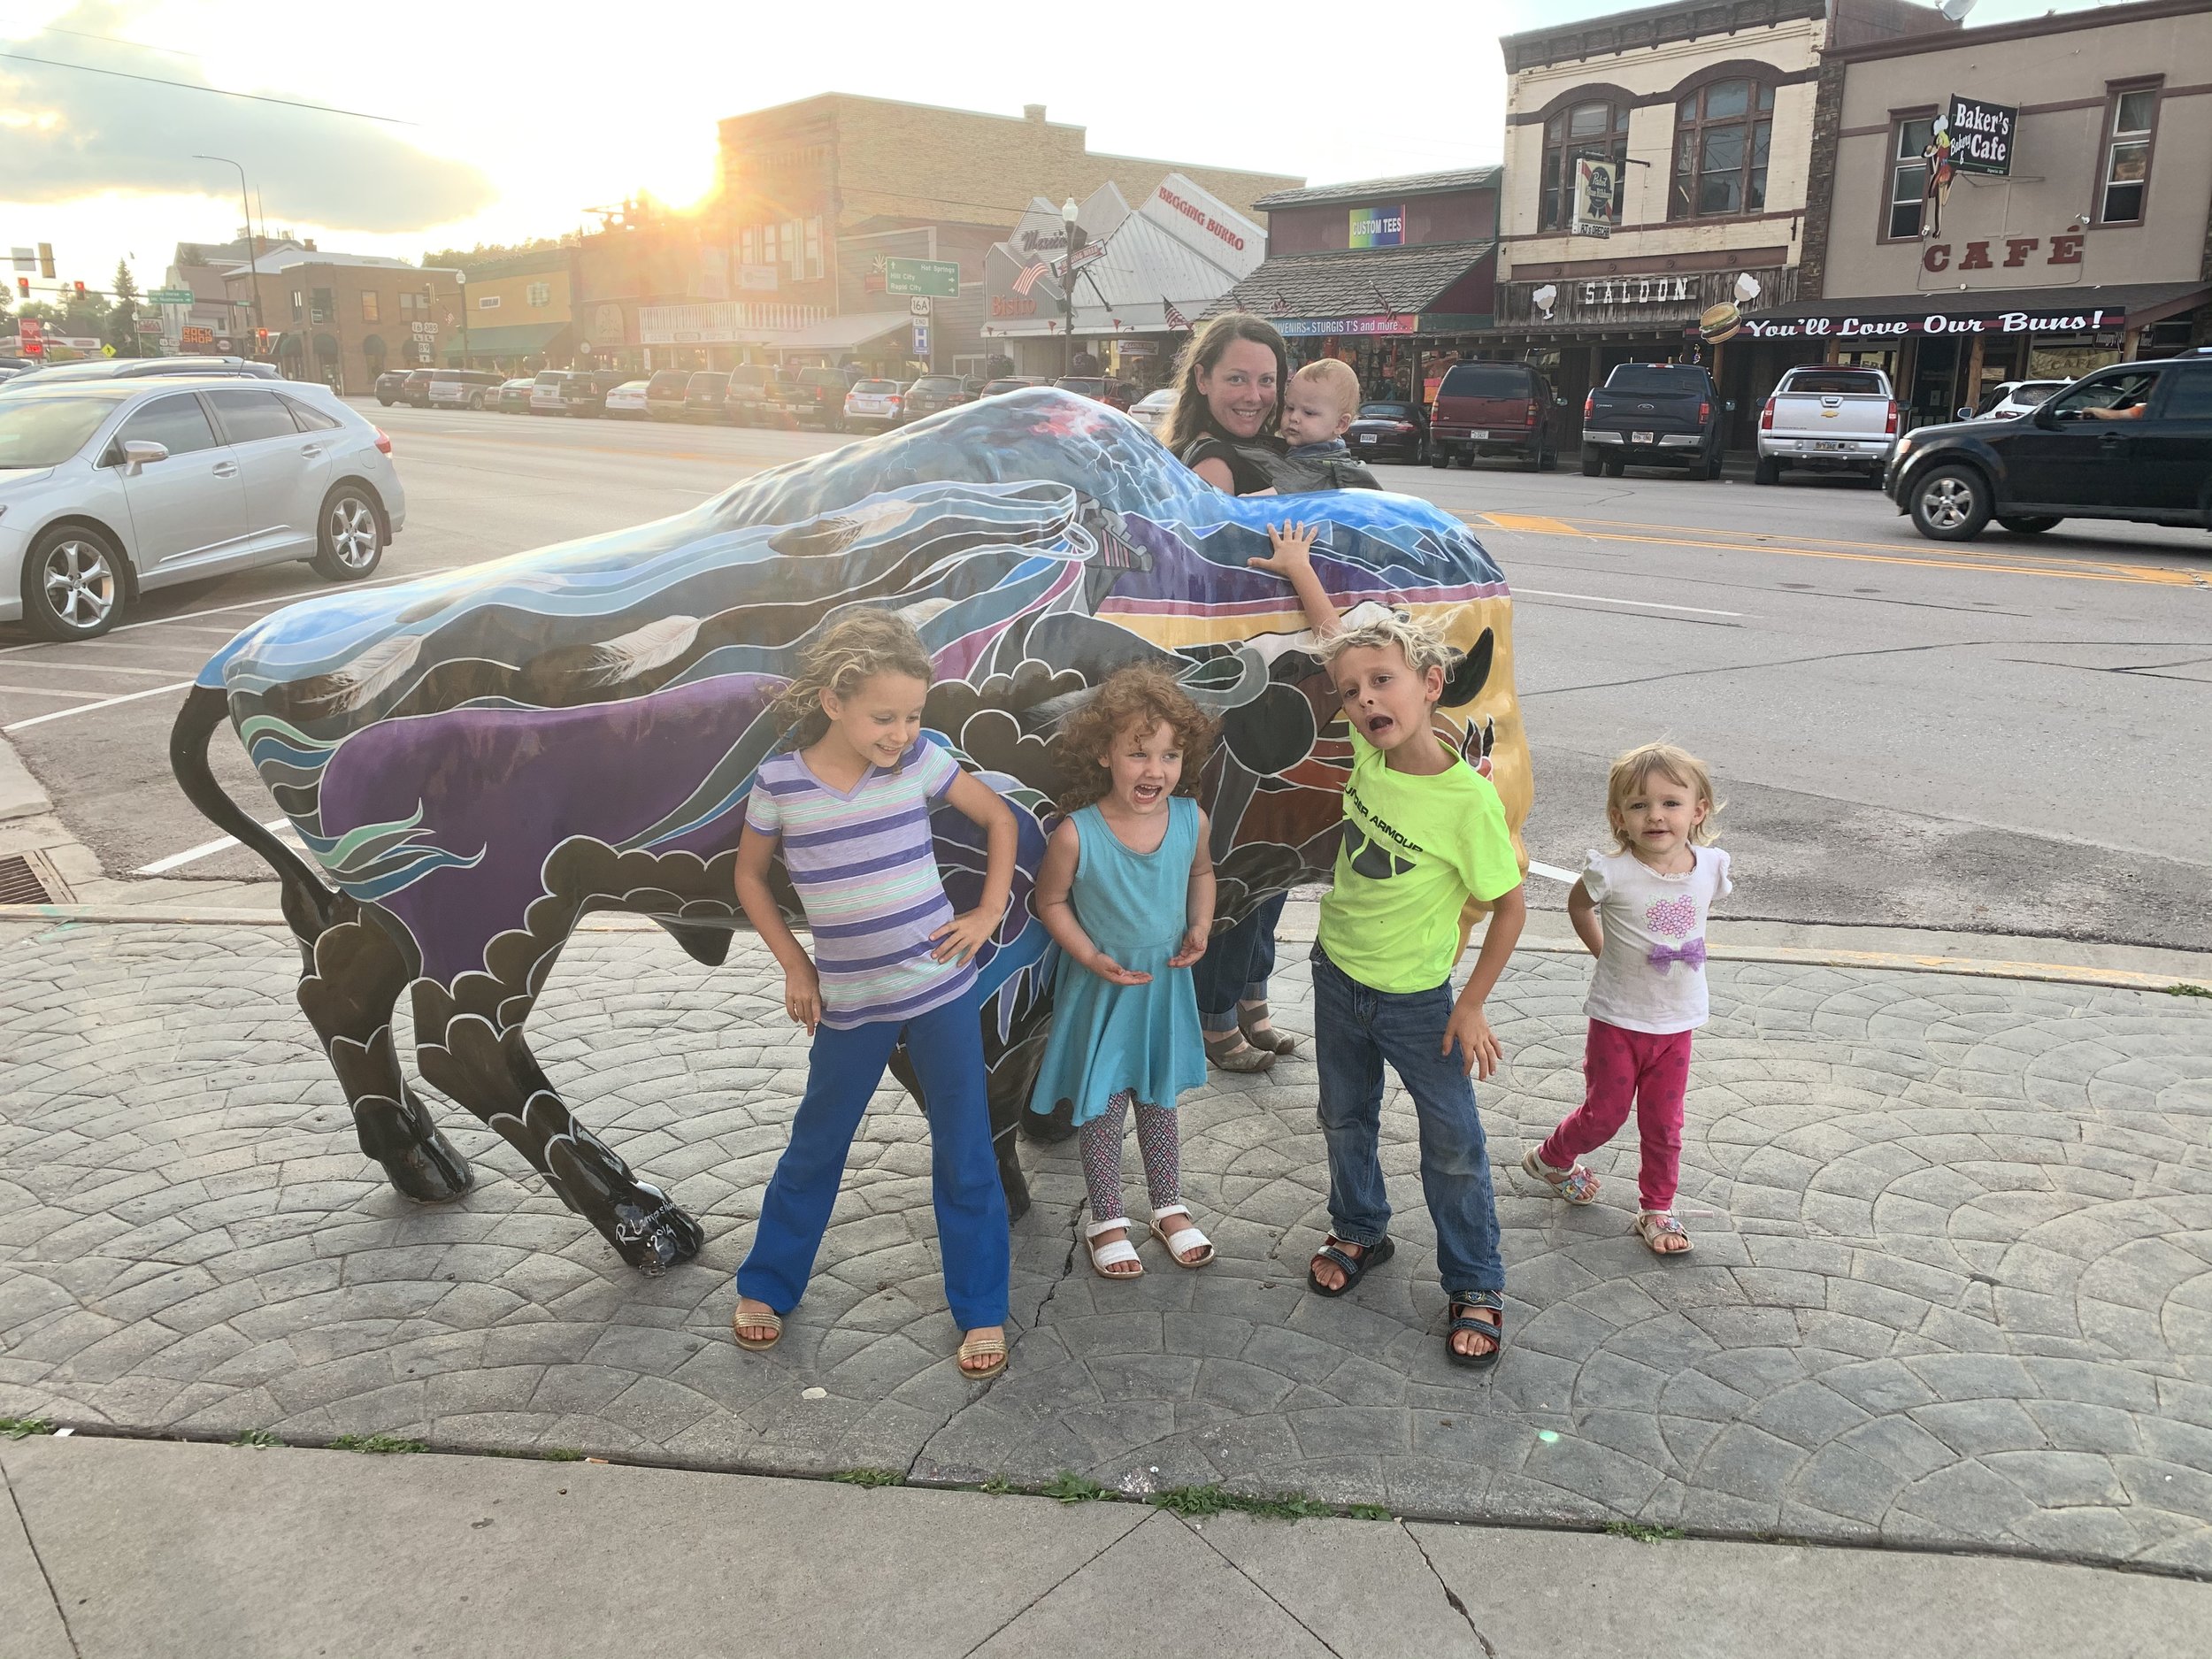  Downtown Custer had multiple bison, and we took multiple pictures. 